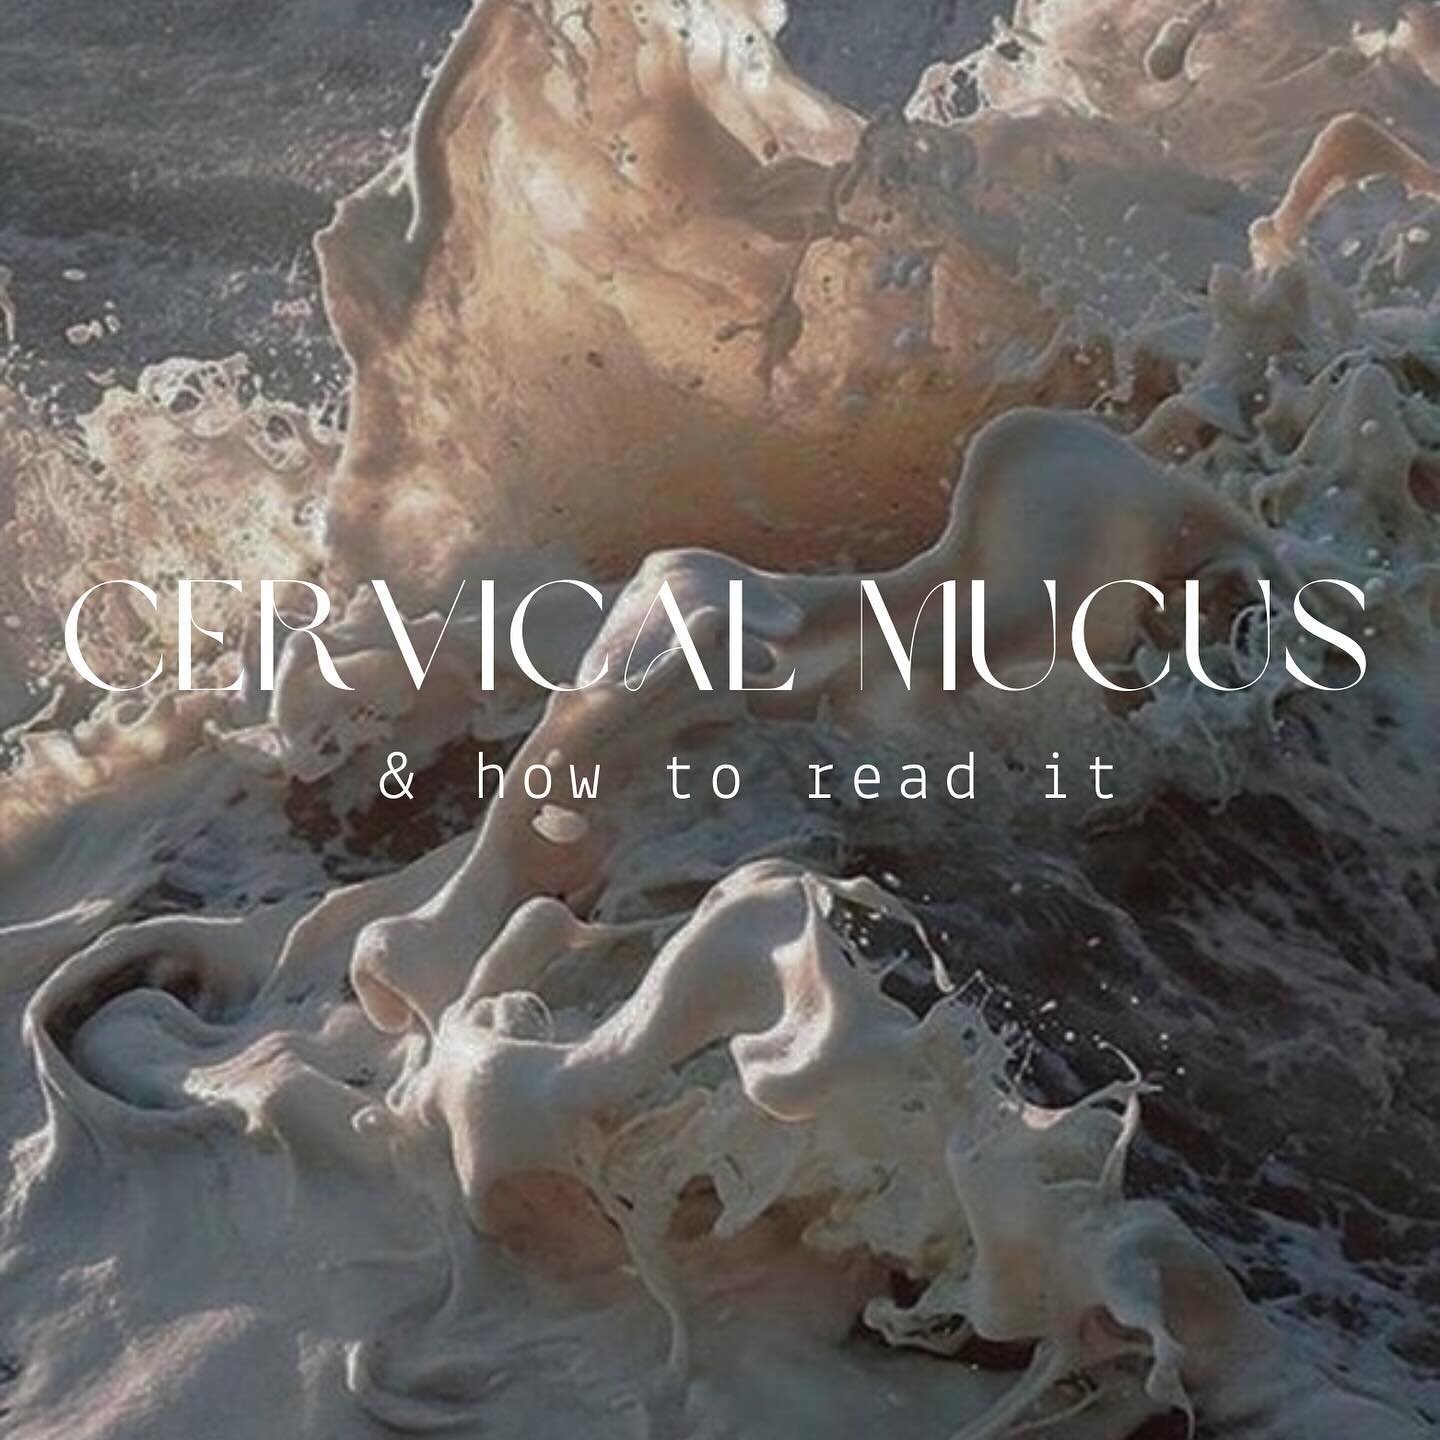 Are you tracking your cervical mucus?
💧
Cervical mucus gives us a fantastic sign of when we are ovulating.
💫
When the cervical mucus peaks at ovulation it should become an egg white substance that stretches over an inch between your thumb and index